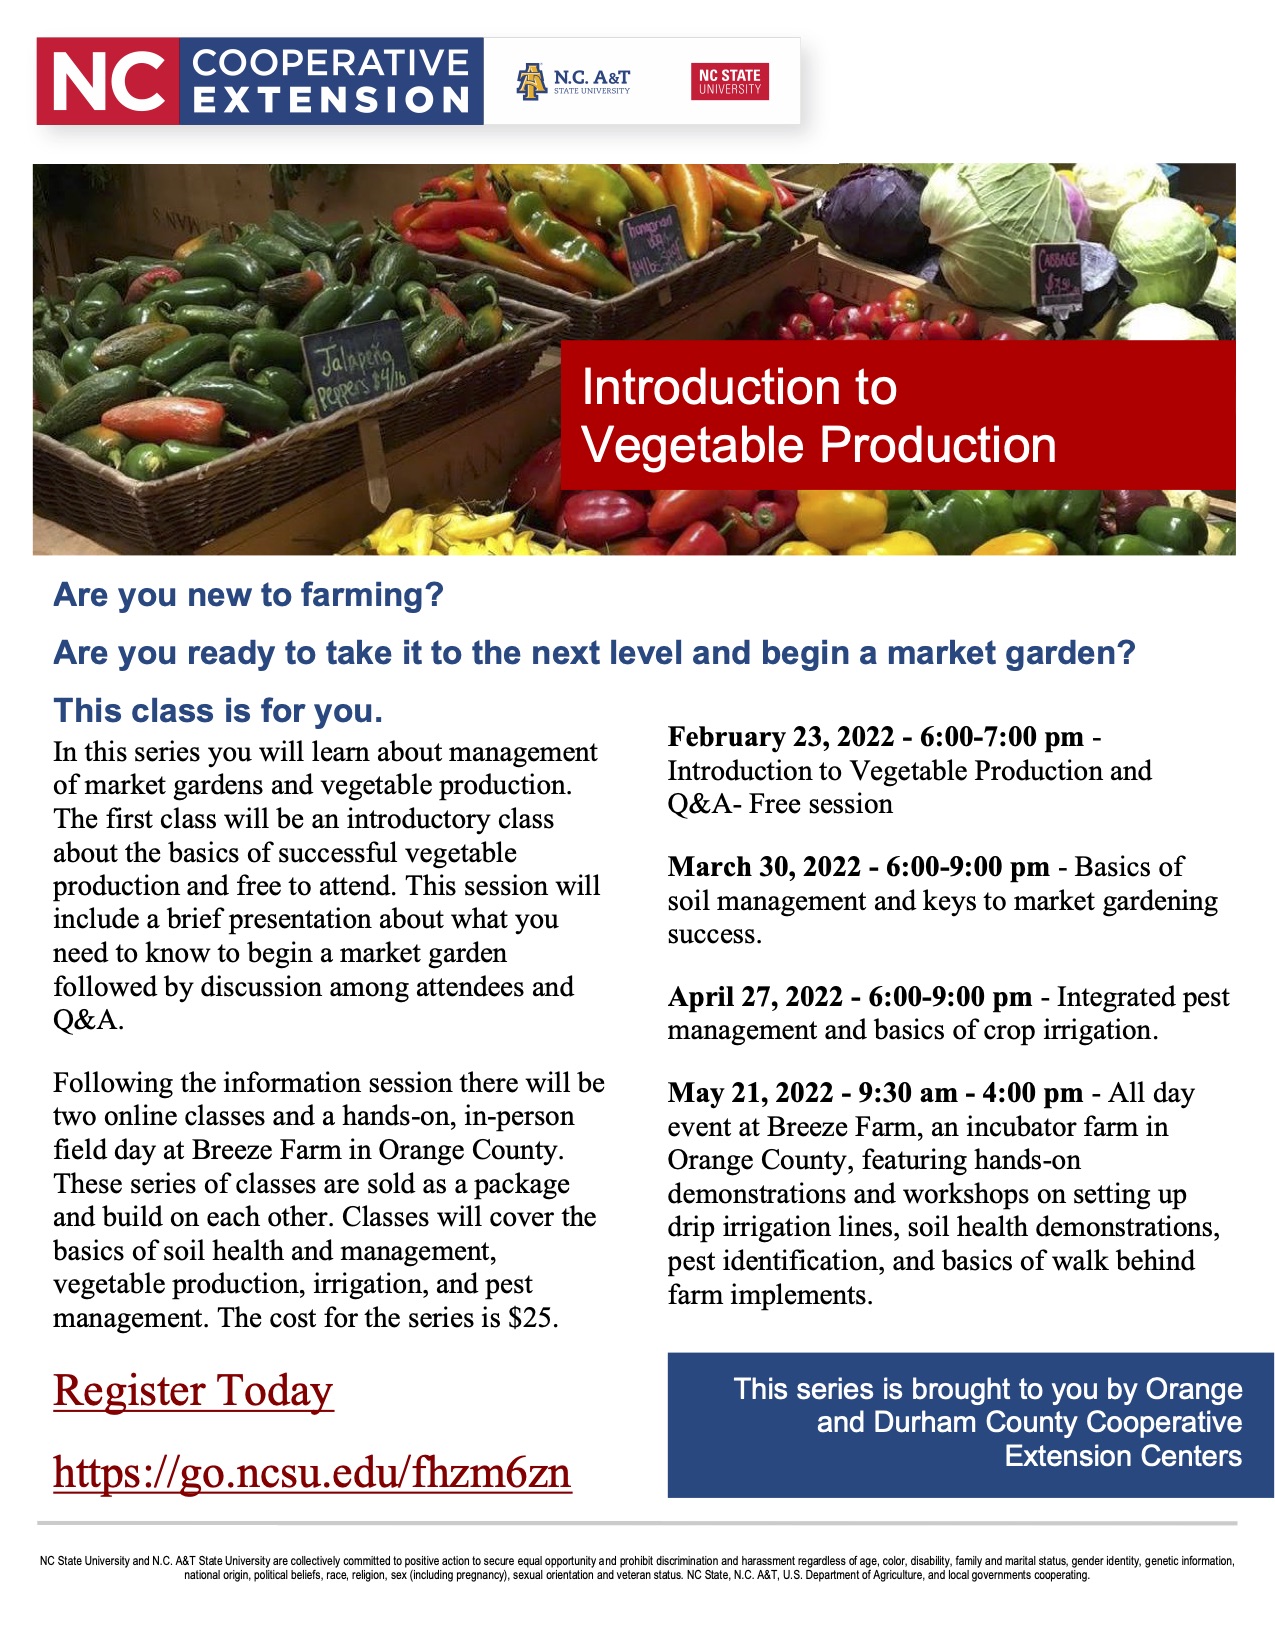 Introduction to vegetable production flyer